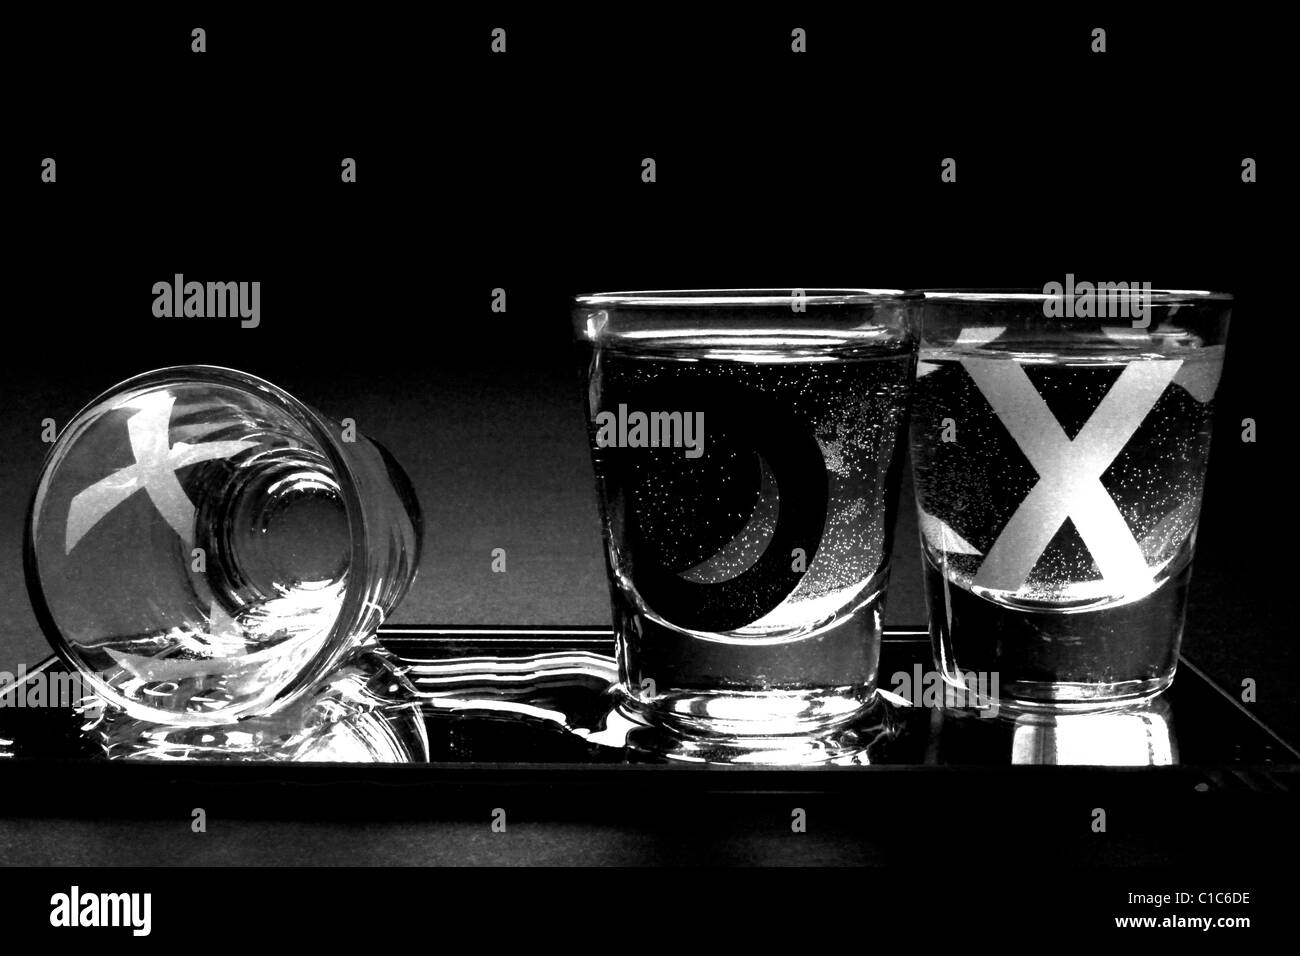 Noughts and Crosses Shot Glasses on Black Background shot from eye level Stock Photo